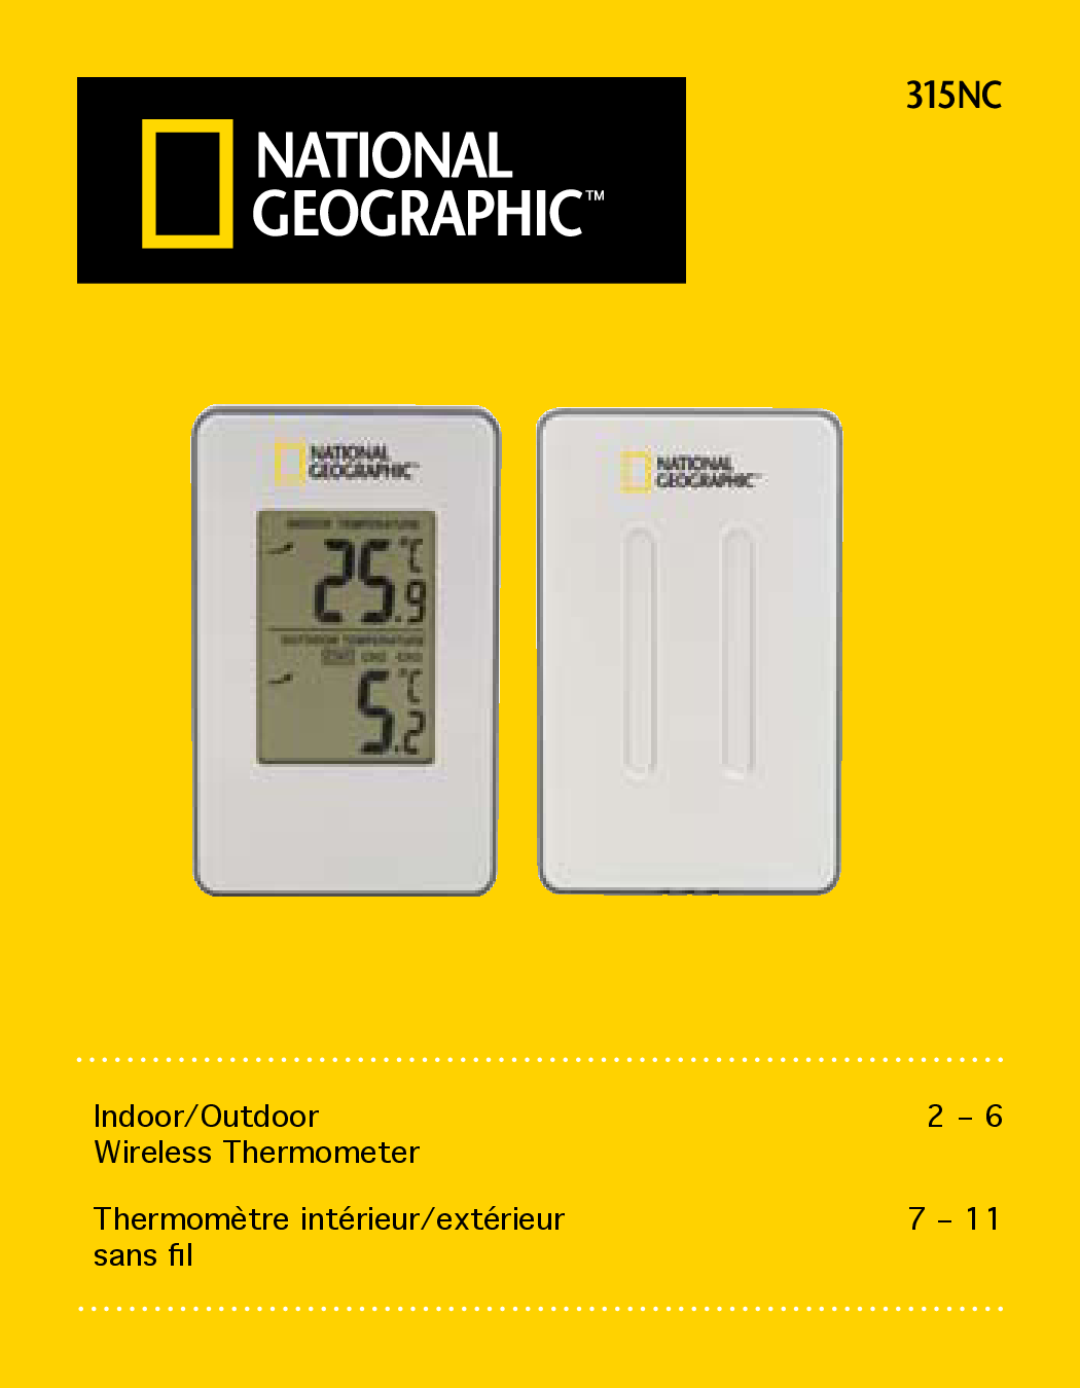 National Geographic 315NC manual Indoor/Outdoor, Wireless Thermometer, Thermomètre intérieur/extérieur, sans fil 